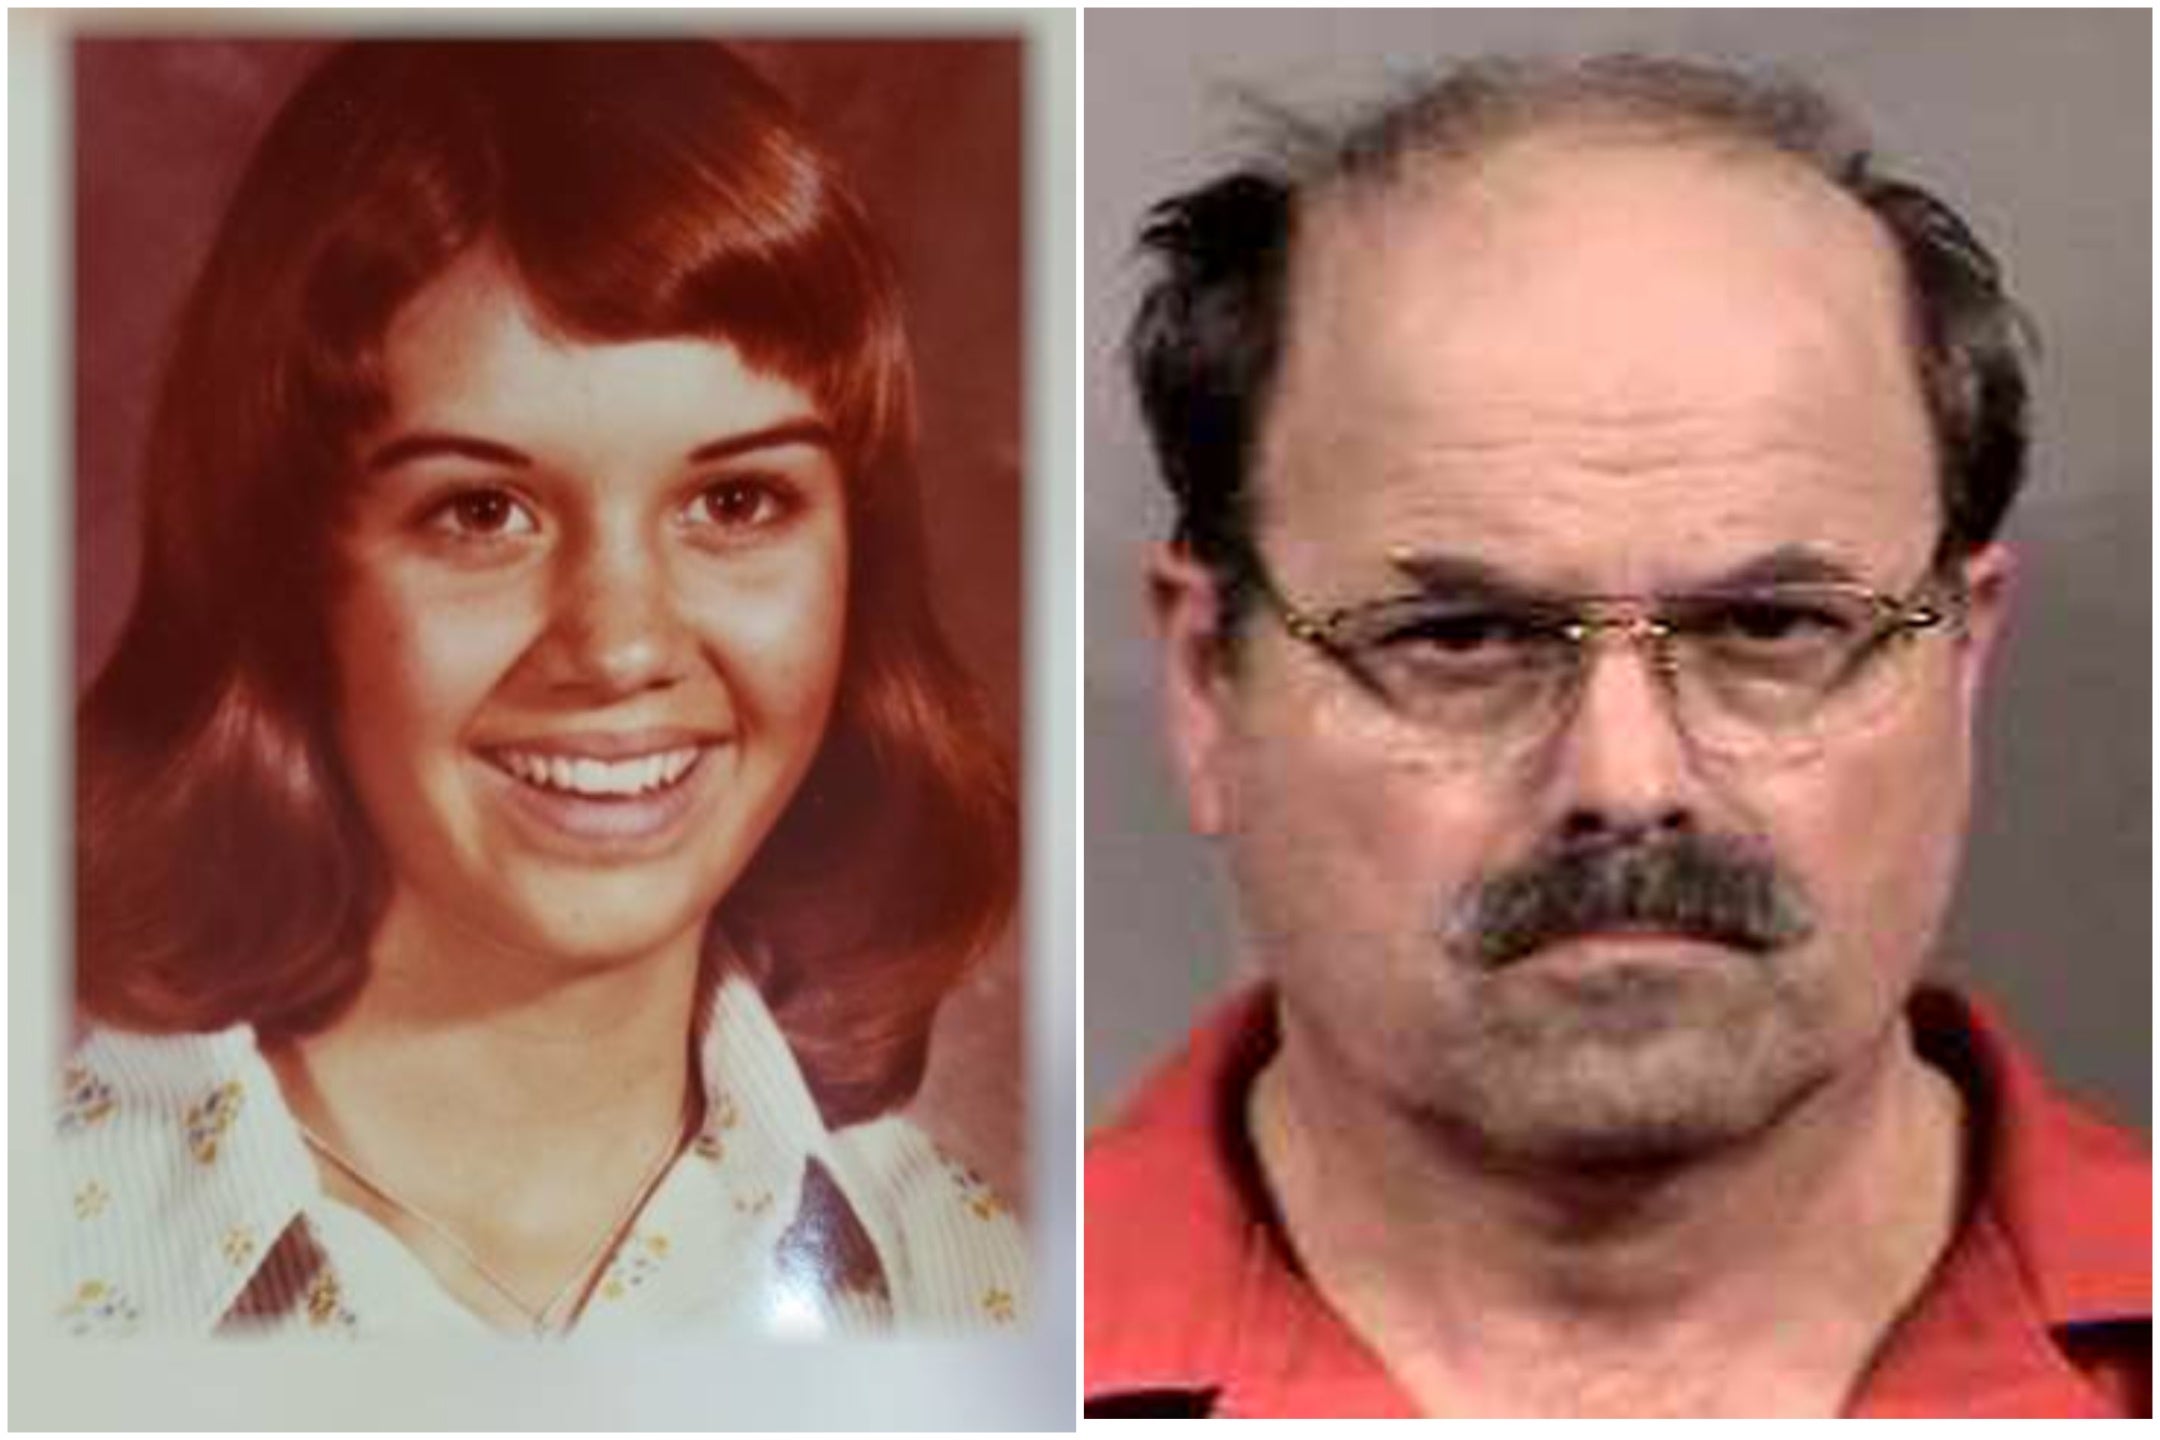 Dennis Rader, also known as the BTK killer, may be linked to a 1976 cold case disappearance of Cynthia Dawn Kinney